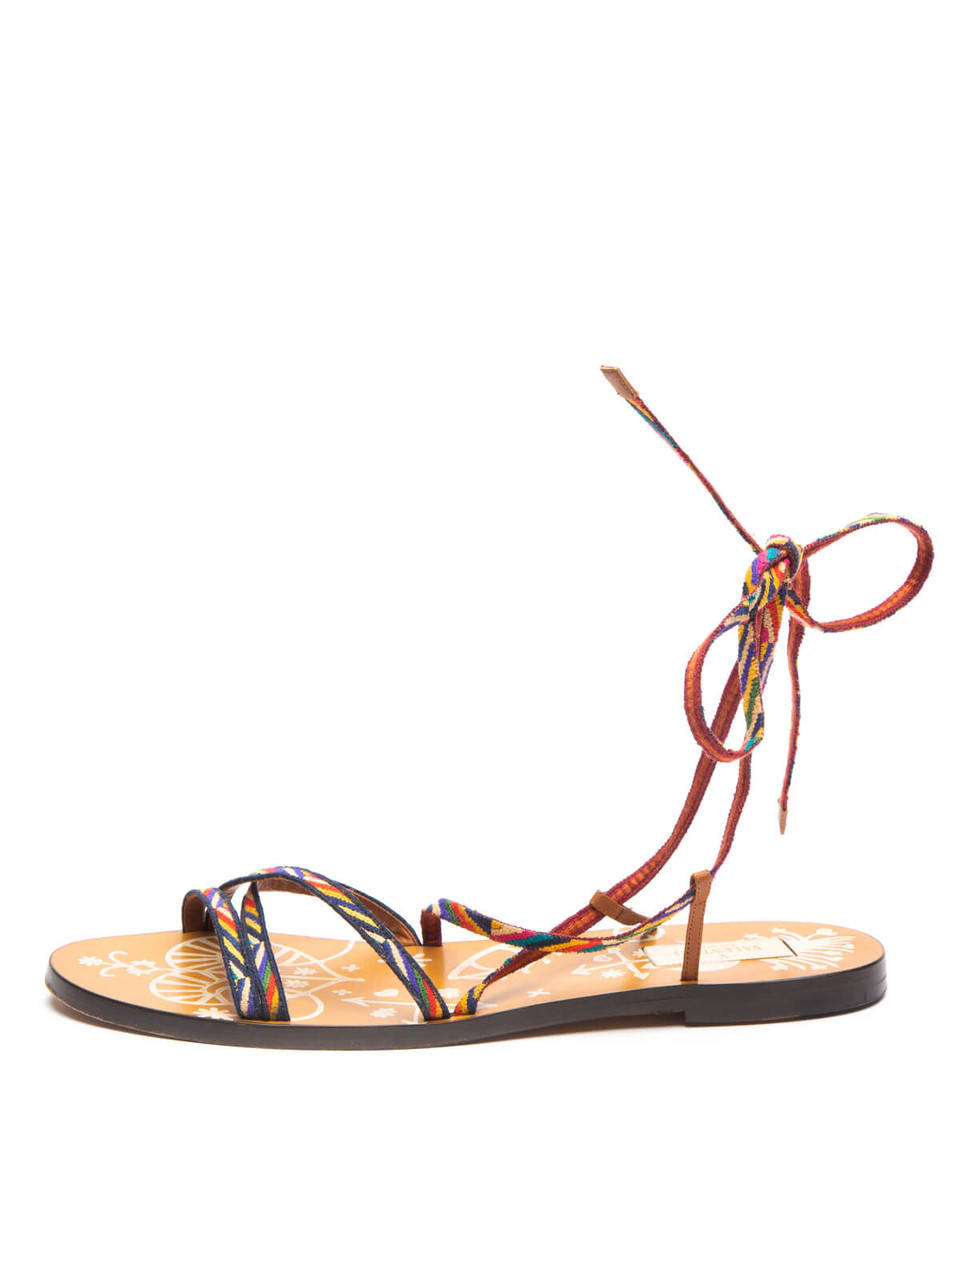 Valentino Women's Lace-up Woven Sandals, Size 7 UK, Brown Leather